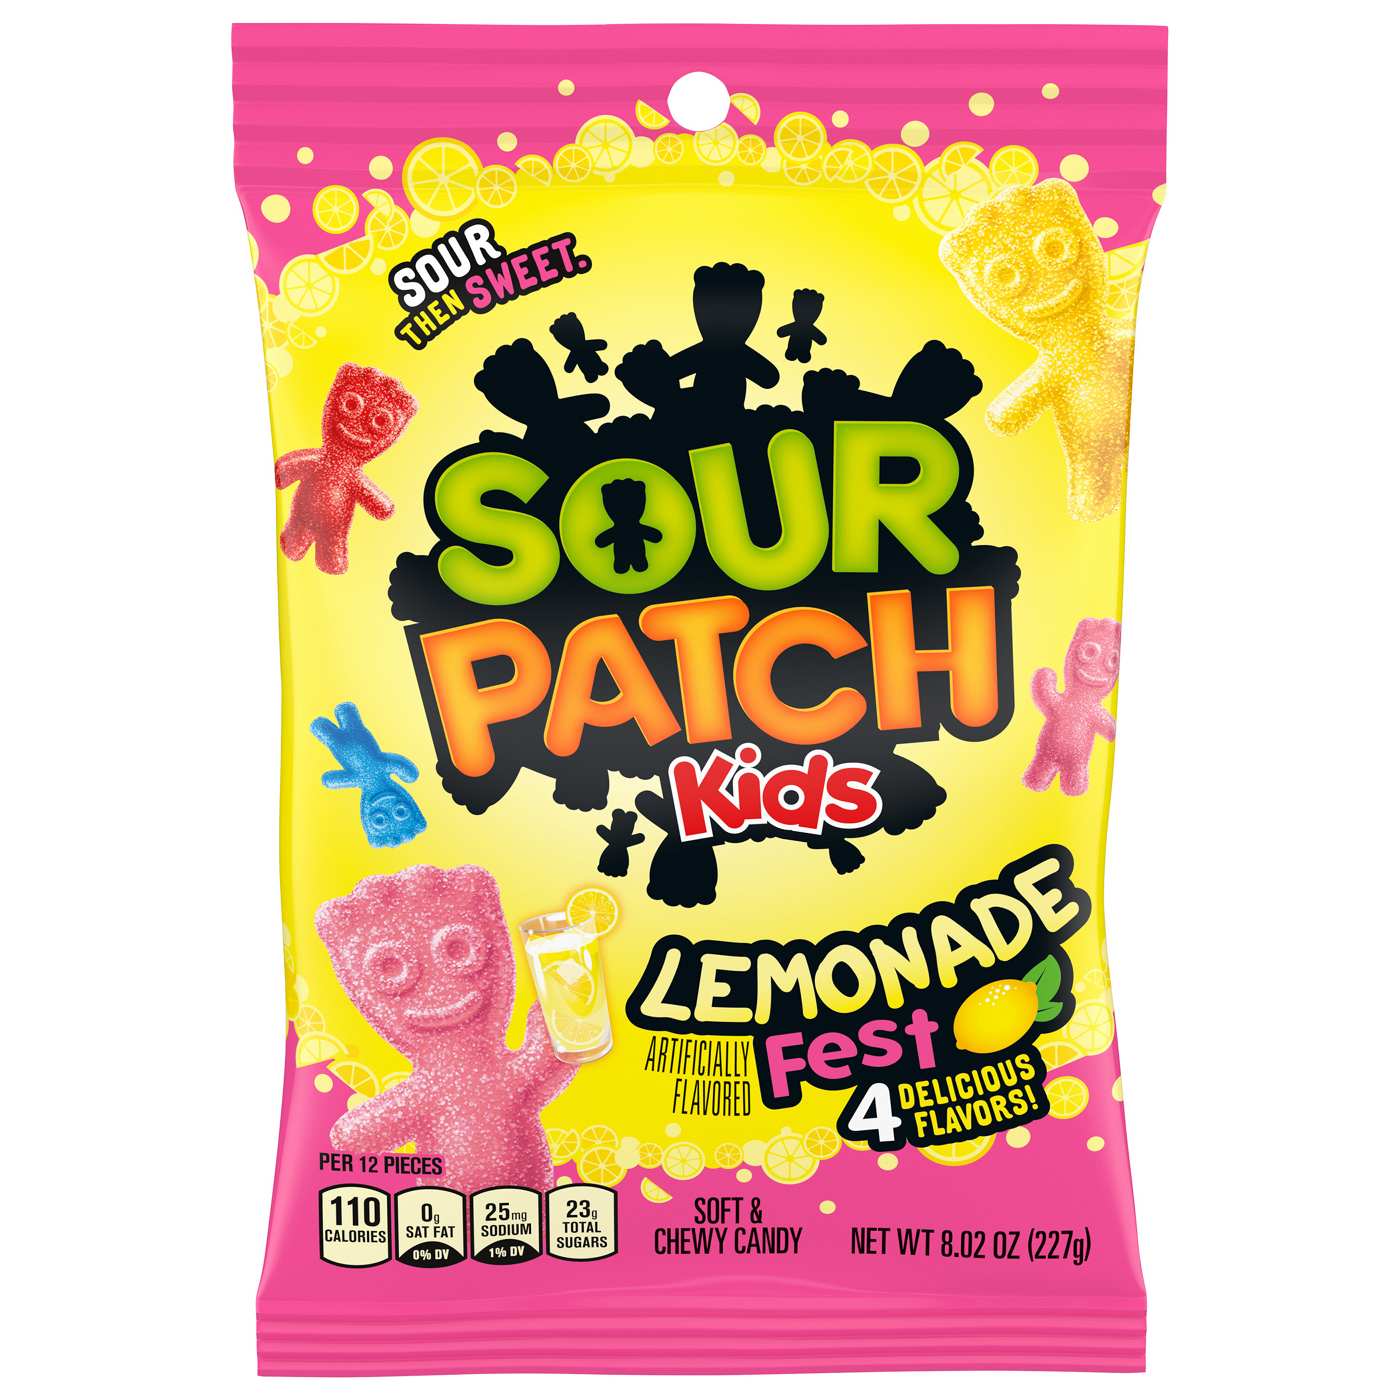 Sour Patch Kids Lemonade Fest Chewy Candy; image 1 of 3